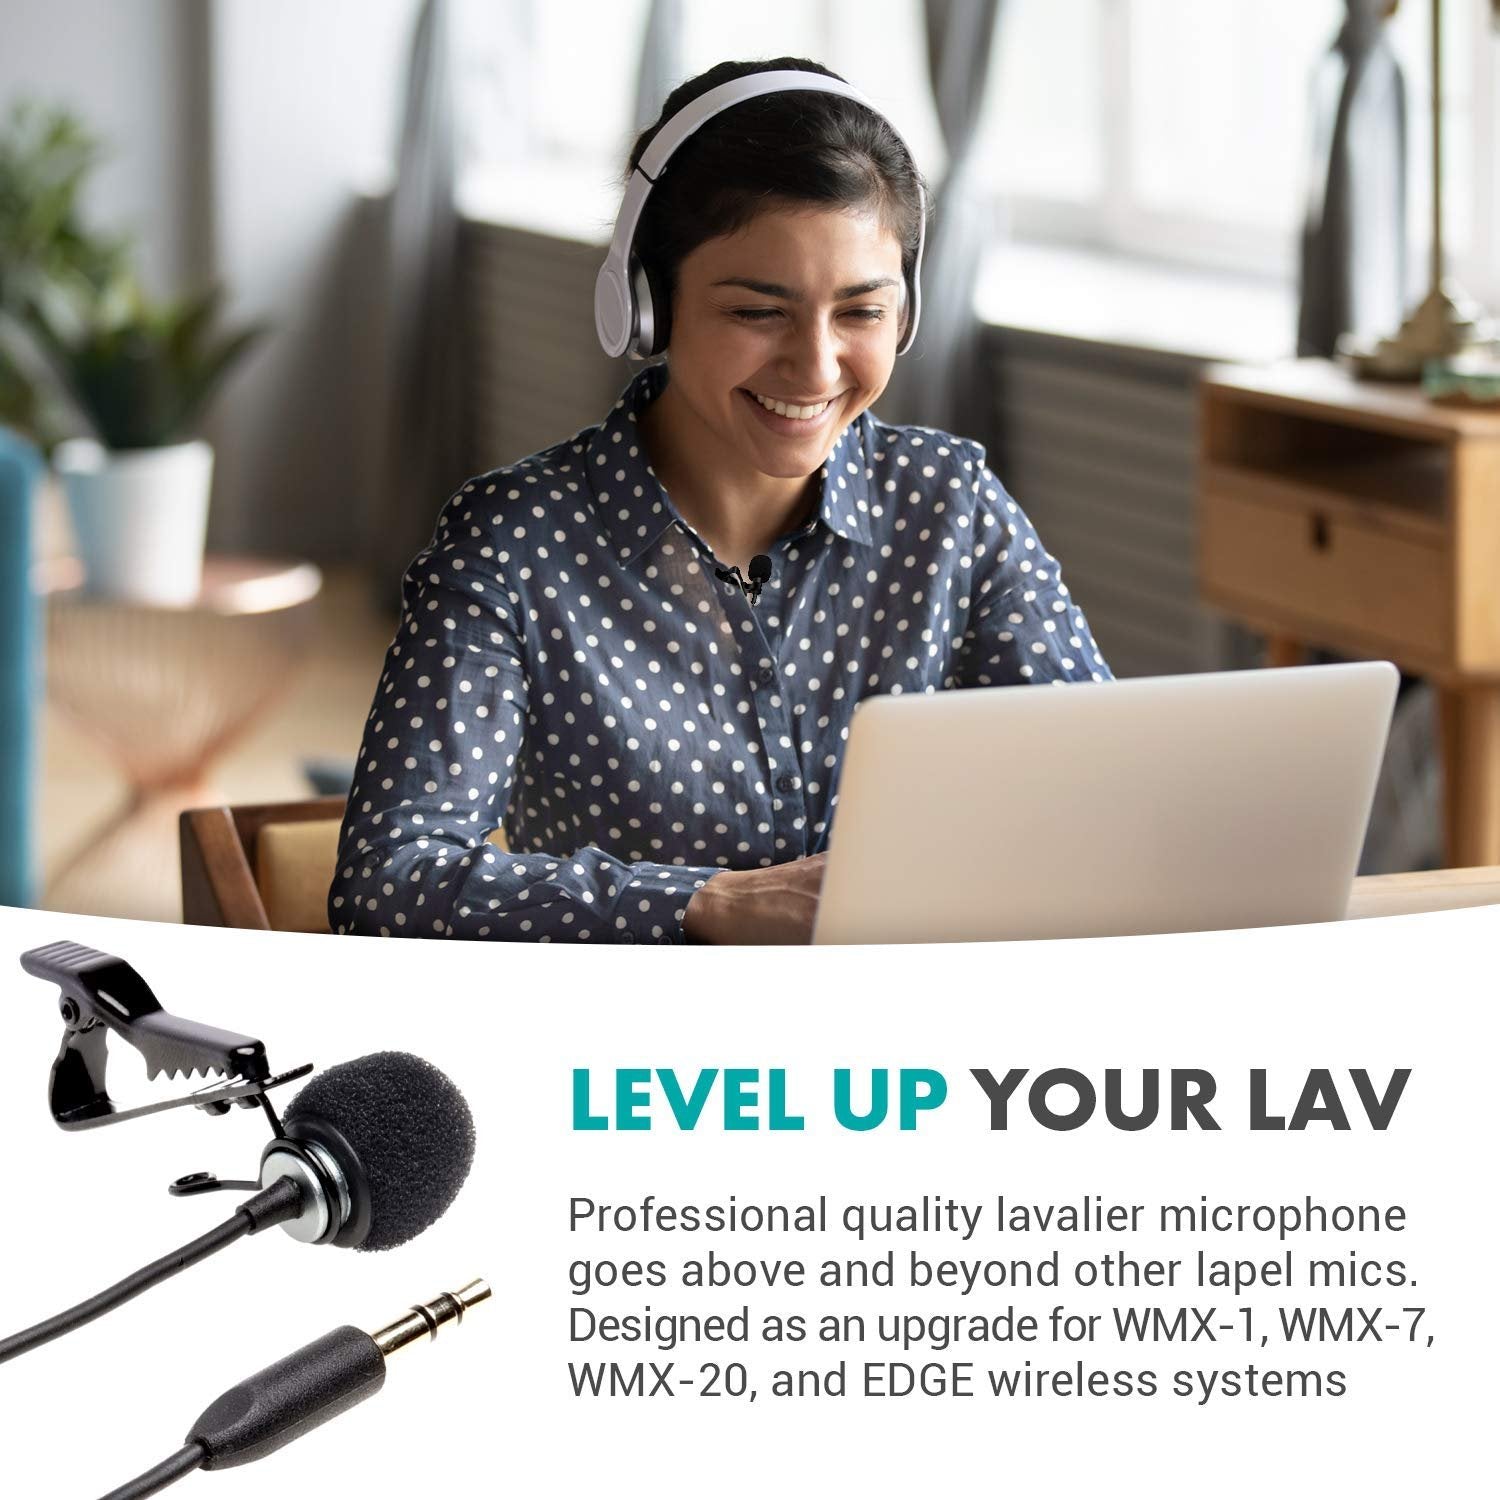 Movo WMX-LAV Lavalier Microphone for the WMX-1, WMX-7, WMX-20 and EDGE Wireless Systems - Lav Mic with 75" 3.5 TRS Cable - Perfect Lapel Mic for Interviews, Live Events, Vlogs, Video and Film